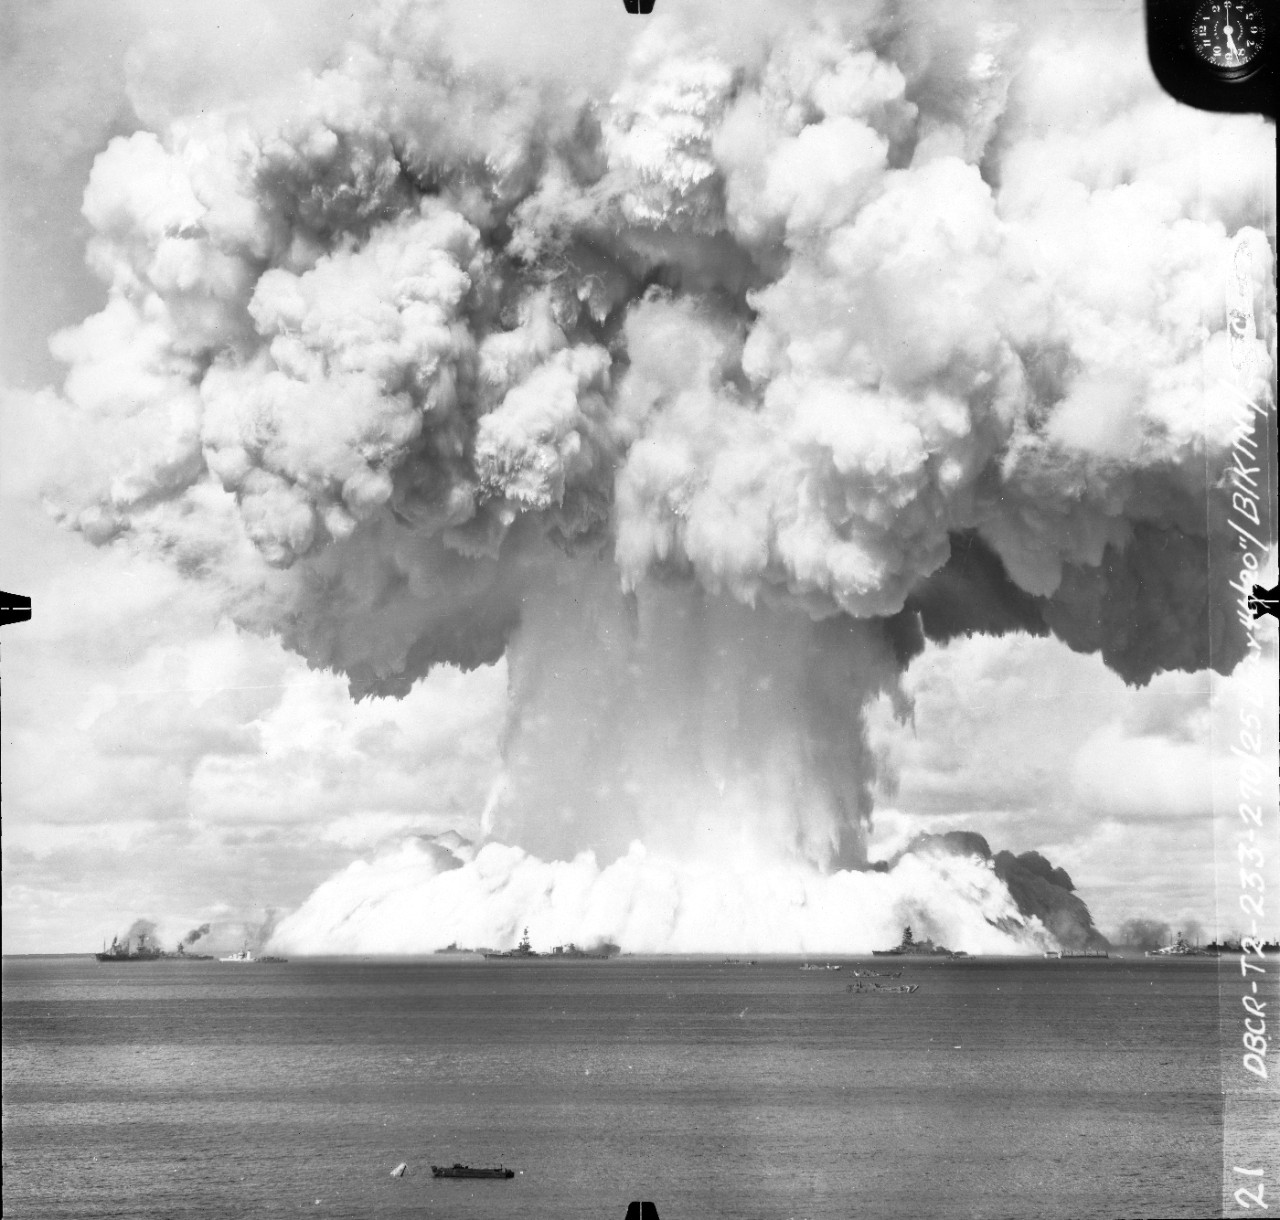 Collection of 38 photographs of the "Baker Day" atomic bomb explosion at Bikini Atoll, Marshall Islands, 25 July 1946. Received from OP-45 prior to 1985. These views are from three different series, one shot from the ground level and the other two taken from aircraft on opposite sides of the explosion site. A full contents listing is below. 